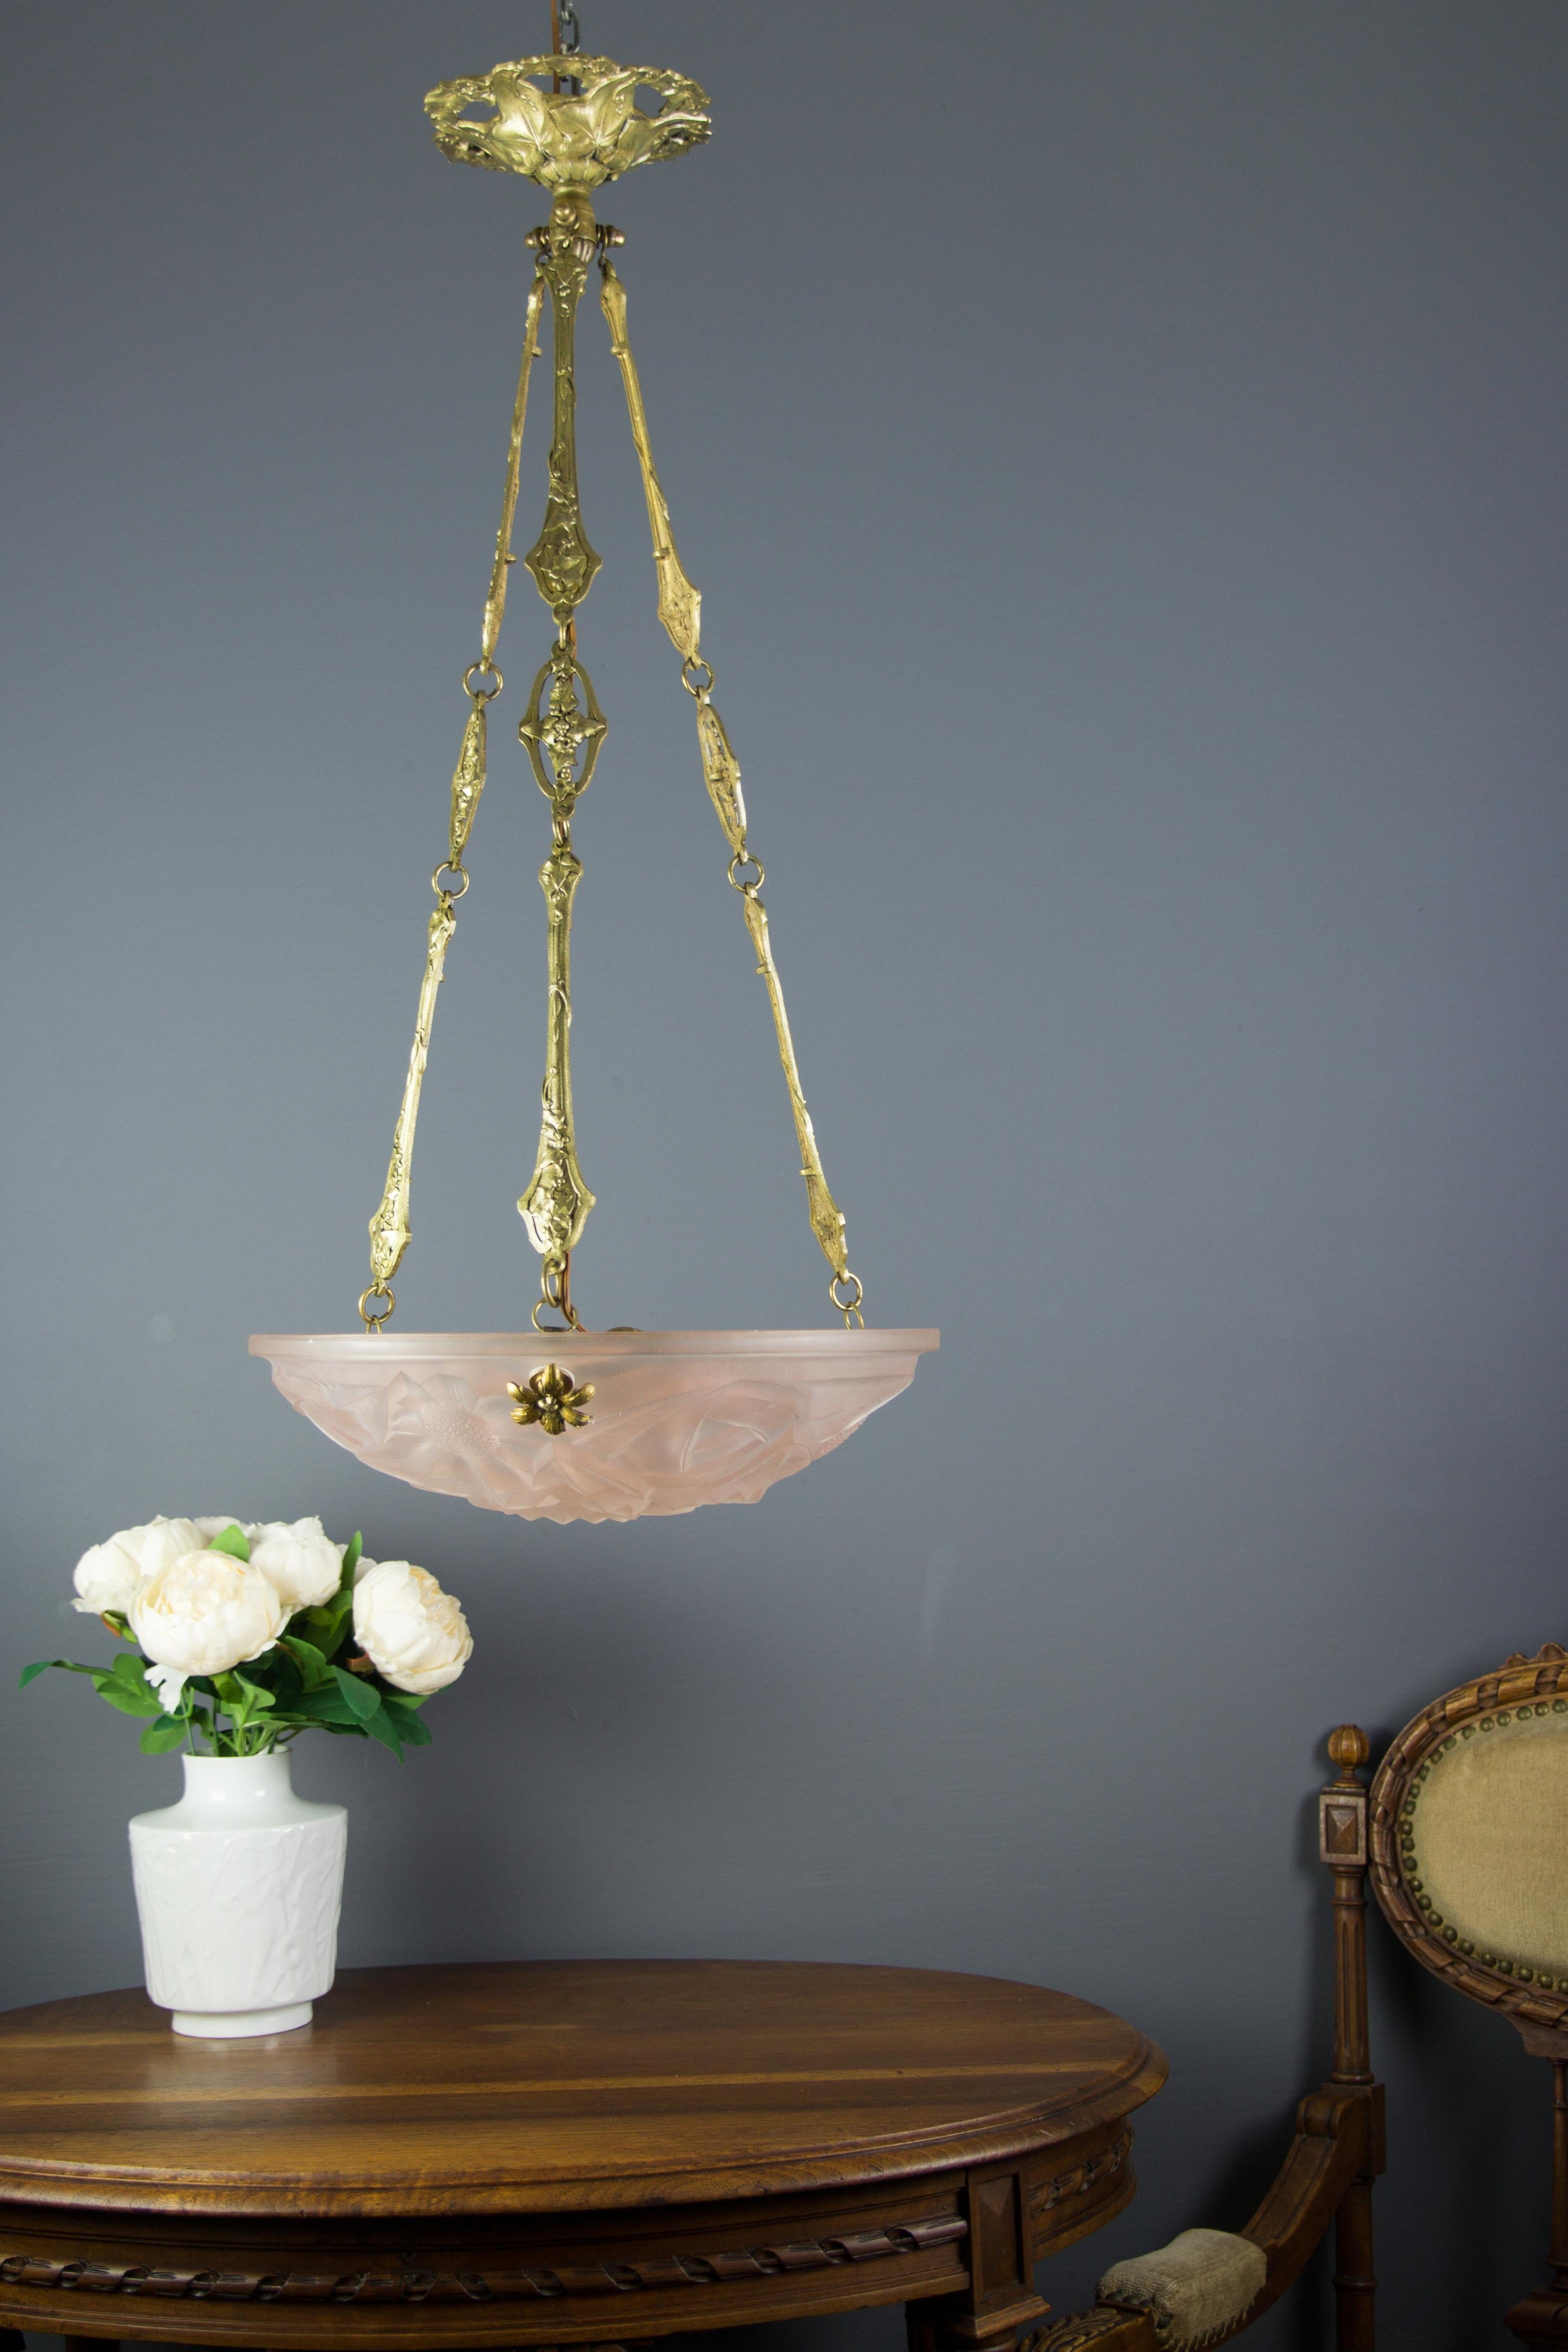 Beautiful French Art Deco pendant light/chandelier with frosted pressed glass shade by Degué, founded by David Guéron (1892 -1950), who specialized in luxury glassware including chandeliers. Beautifully shaped pastel pink glass bowl features